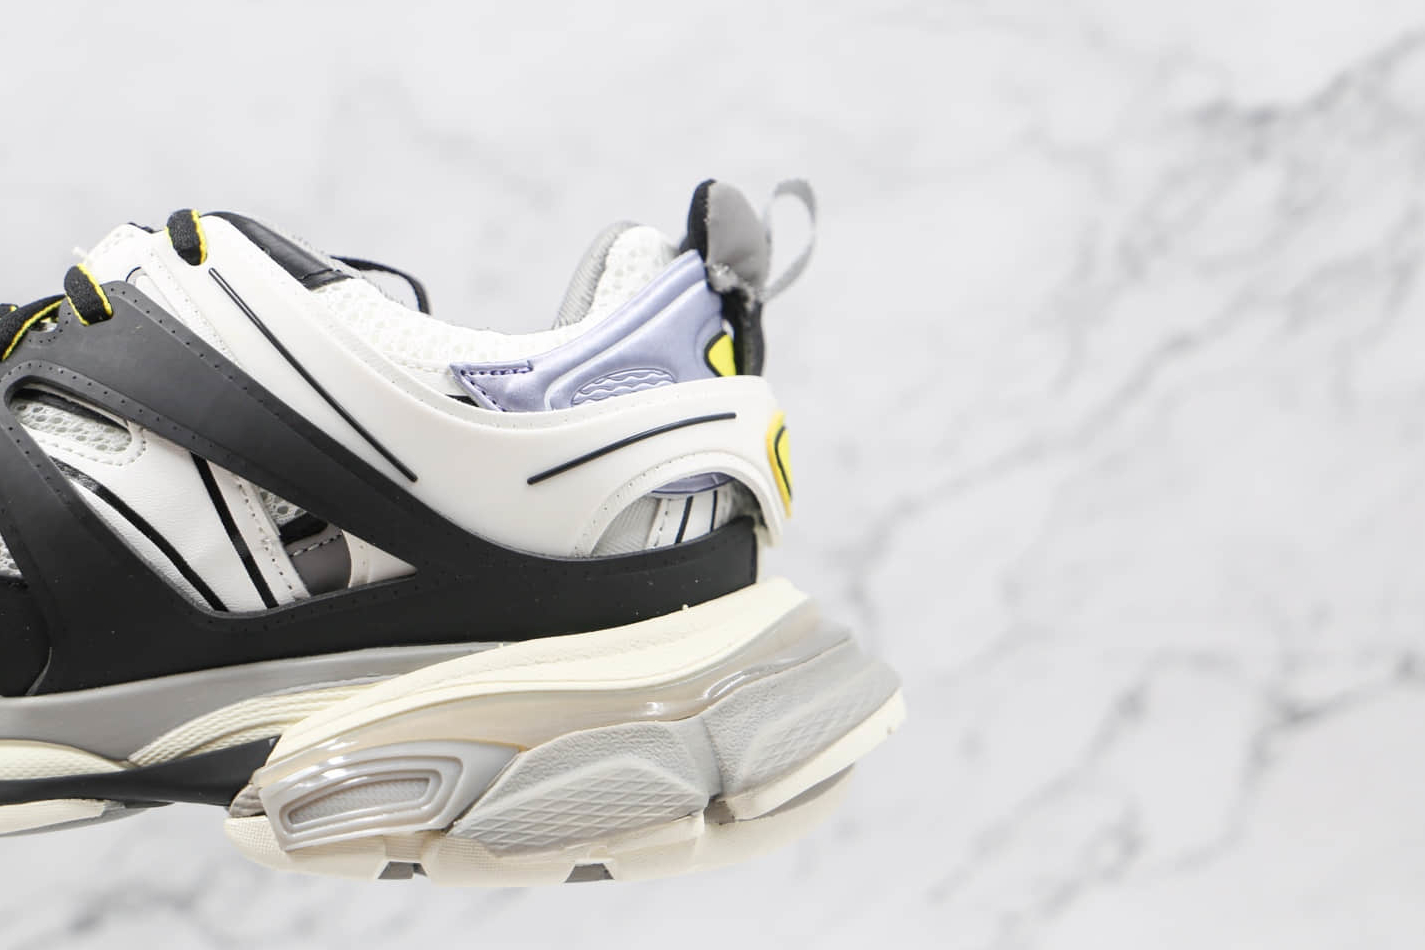 Shop the Stylish Balenciaga Track.2 Trainer 'White Black' 542023W3AD11225 for Ultimate Comfort and Fashion Forward Look